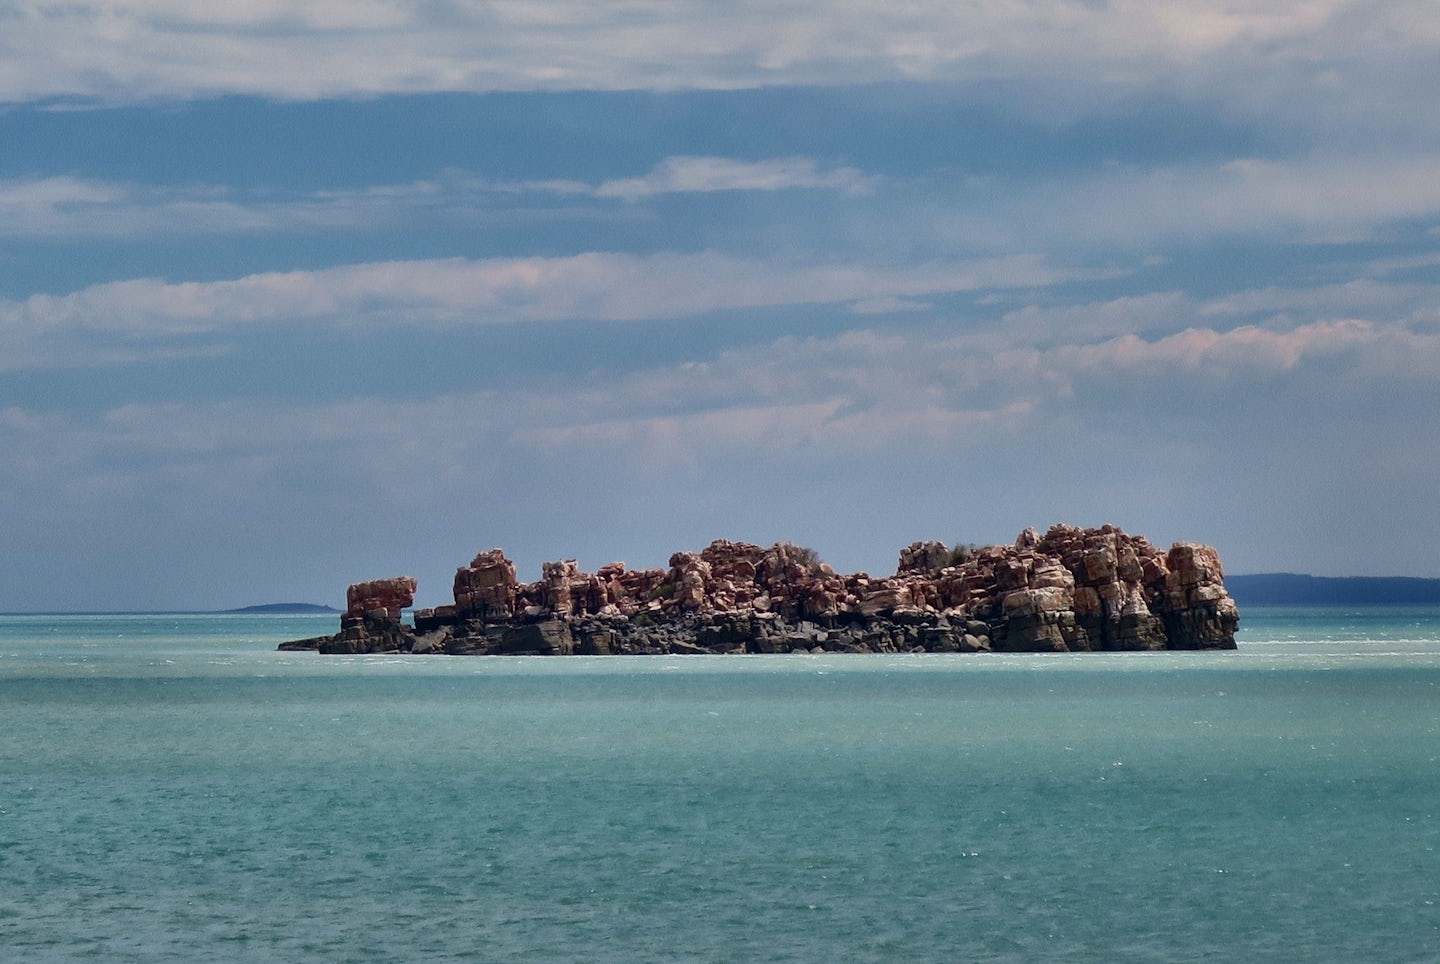 One of thousands of little isles around the Kimberley coast